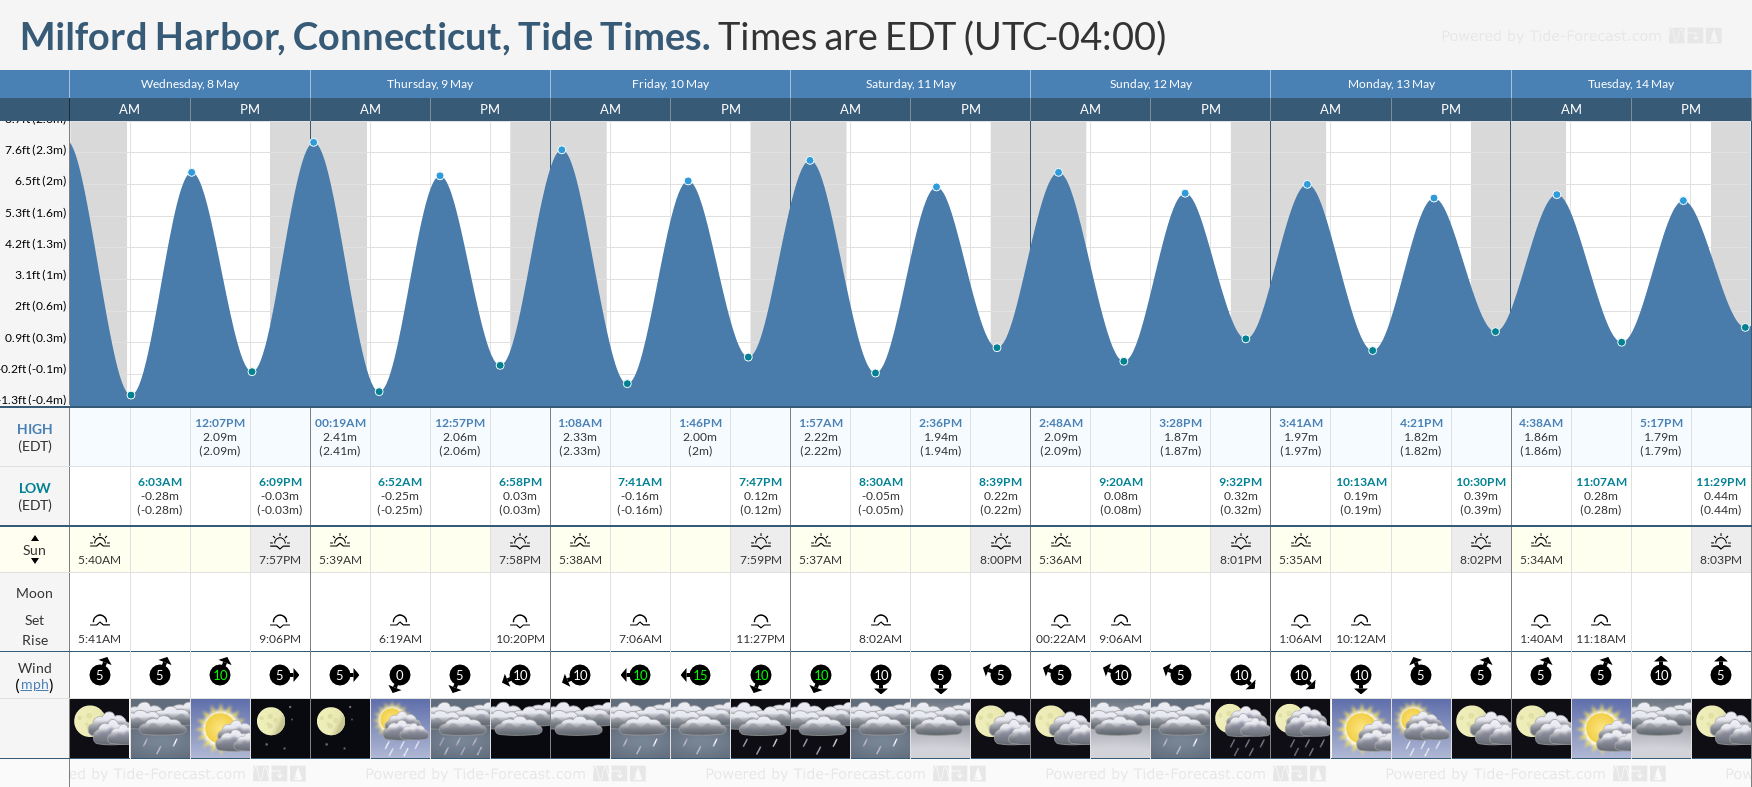 Milford Harbor, Connecticut Tide Chart including high and low tide tide times for the next 7 days